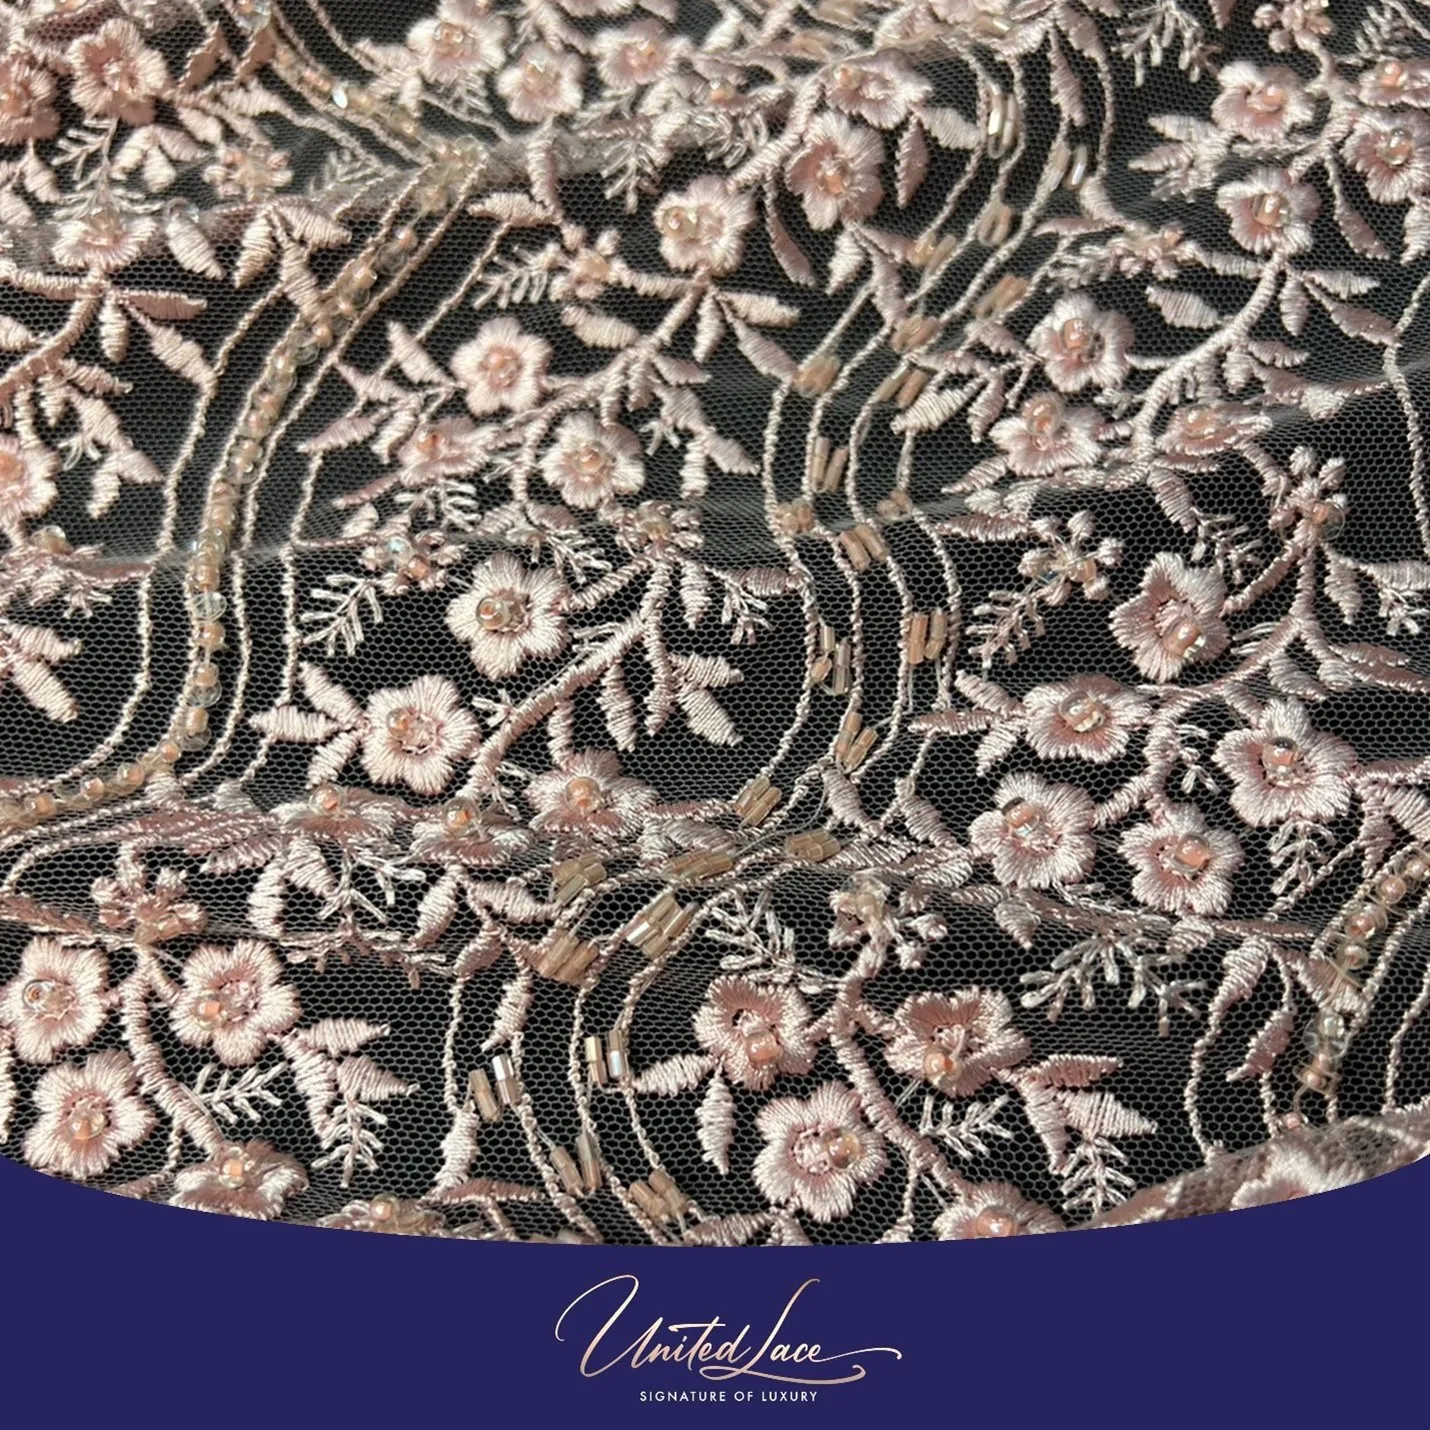 Cotton lace fabric, Embroidery fabric